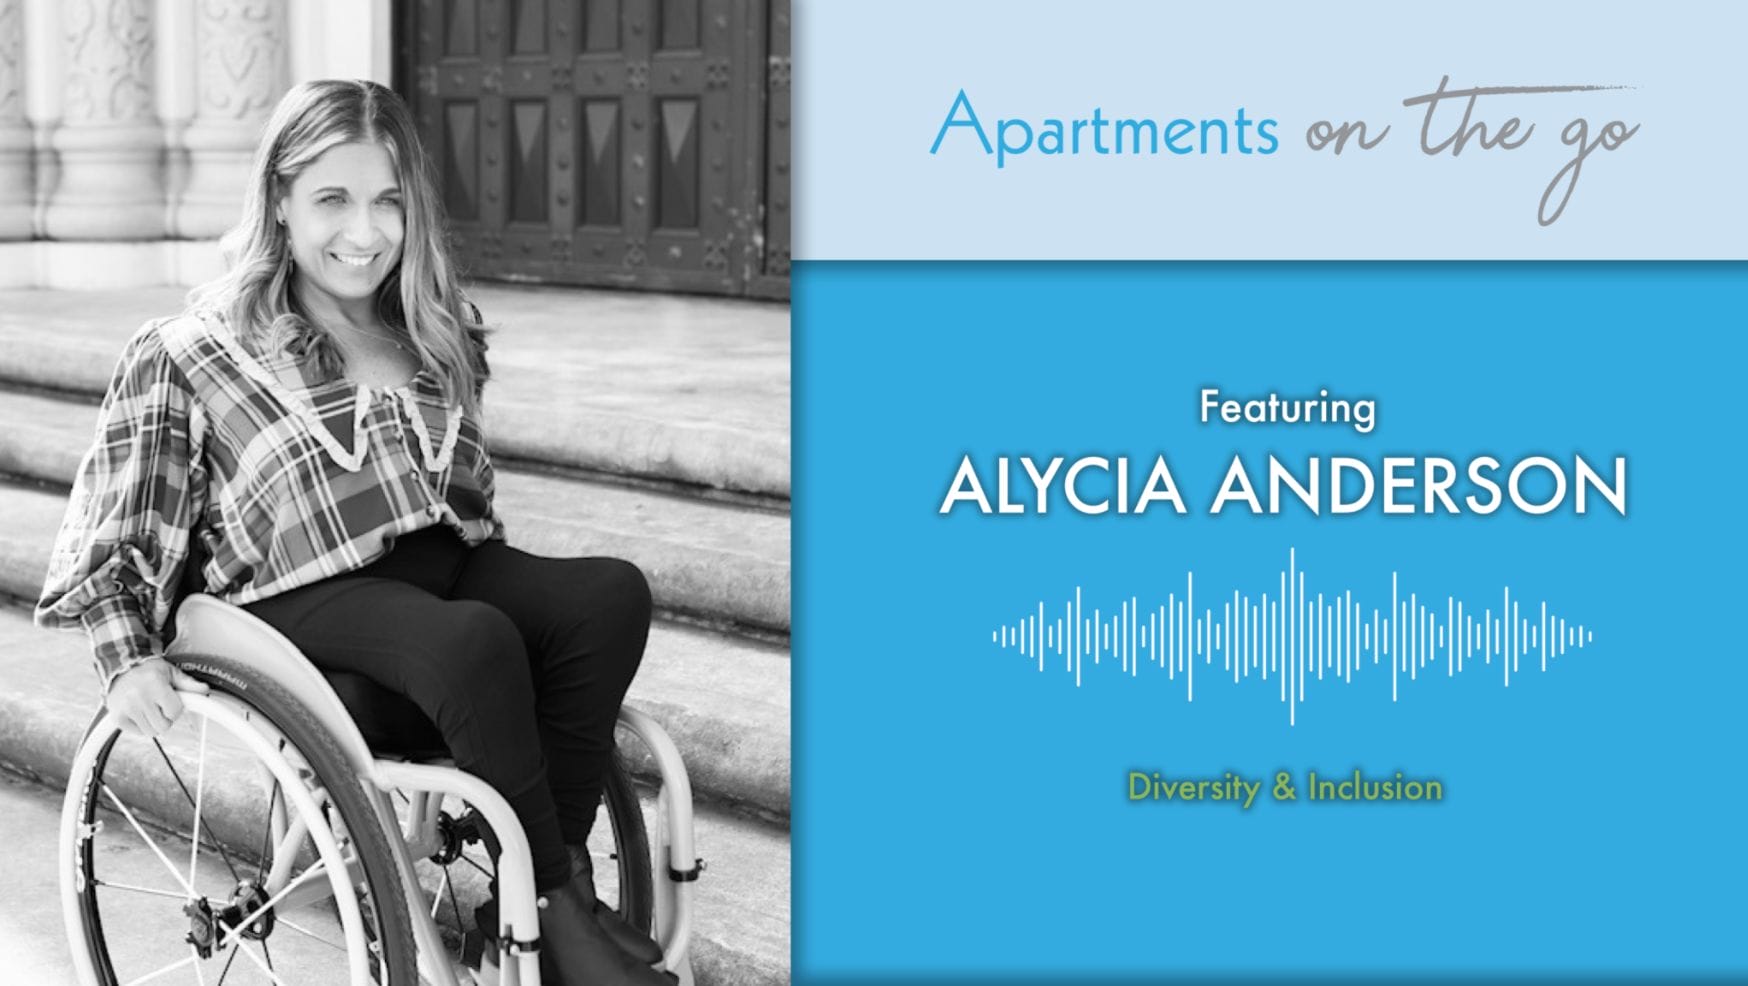 image of alycia promoting the apartments on the go podcast featuring diversity and inclusion